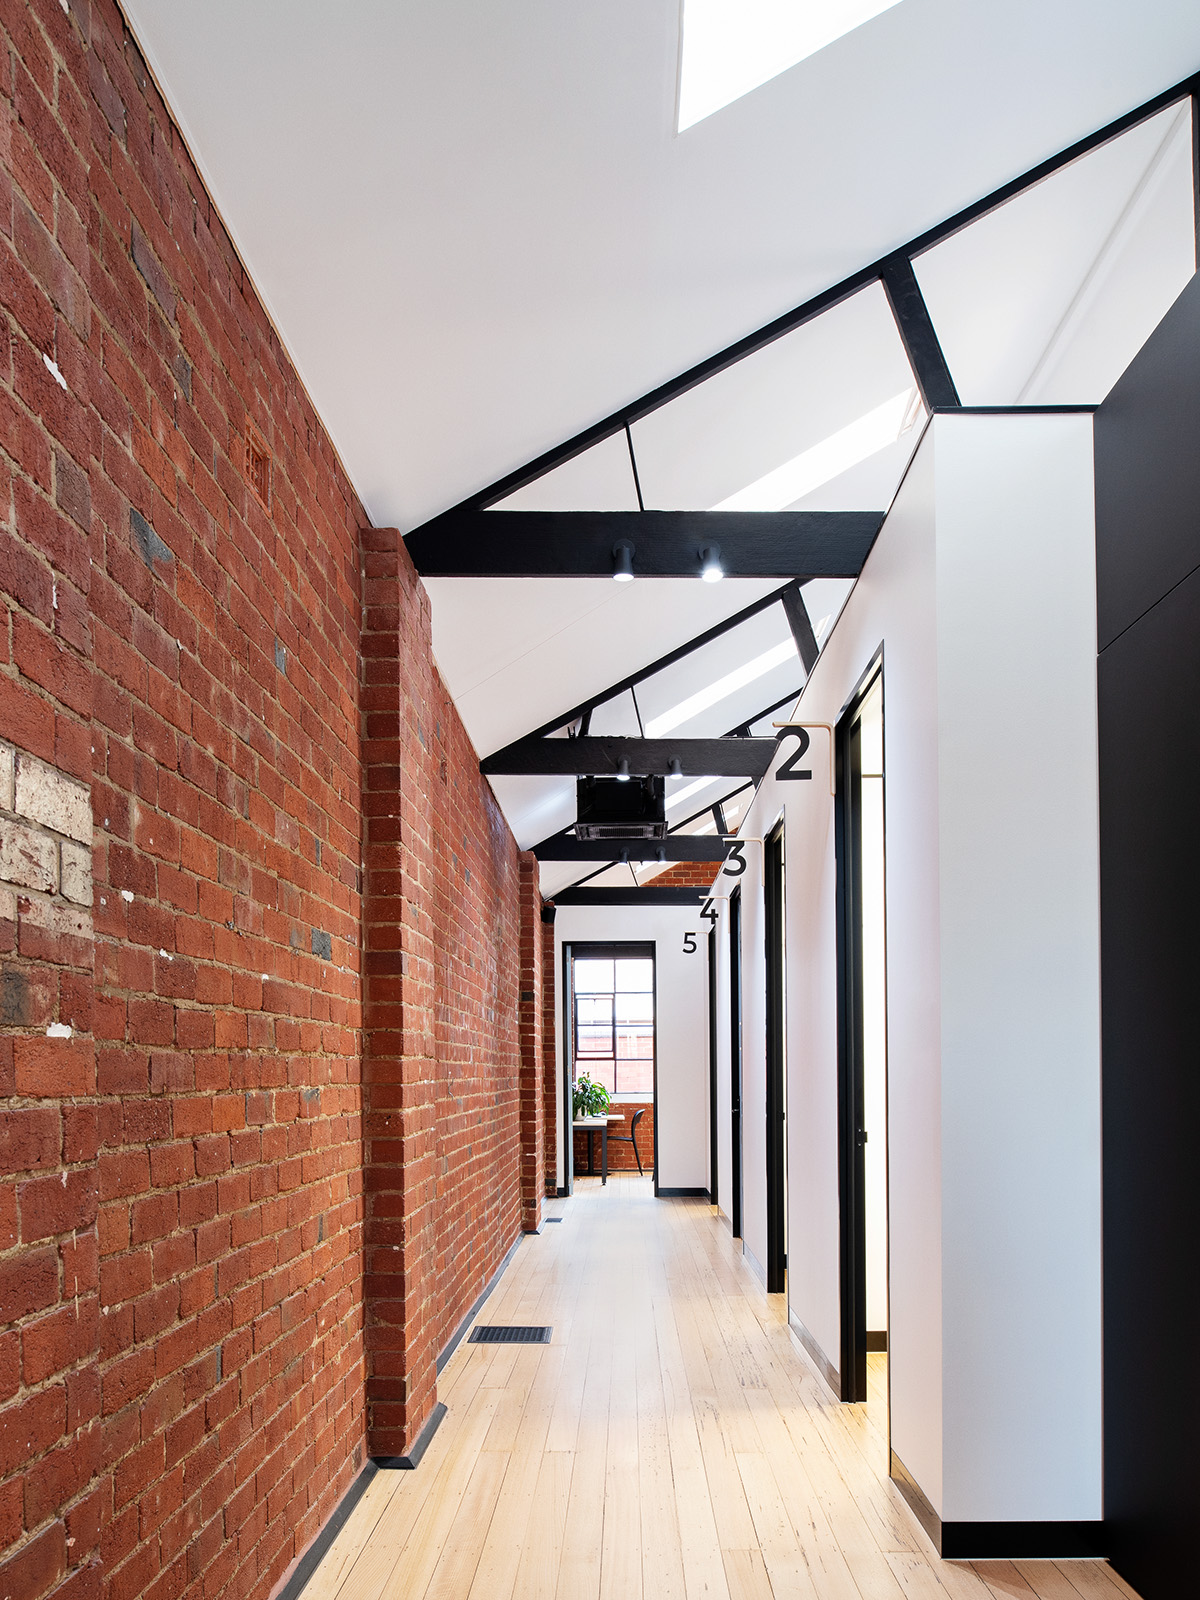 Featured ceilings | warehouse conversion and fitout | Eagleheart